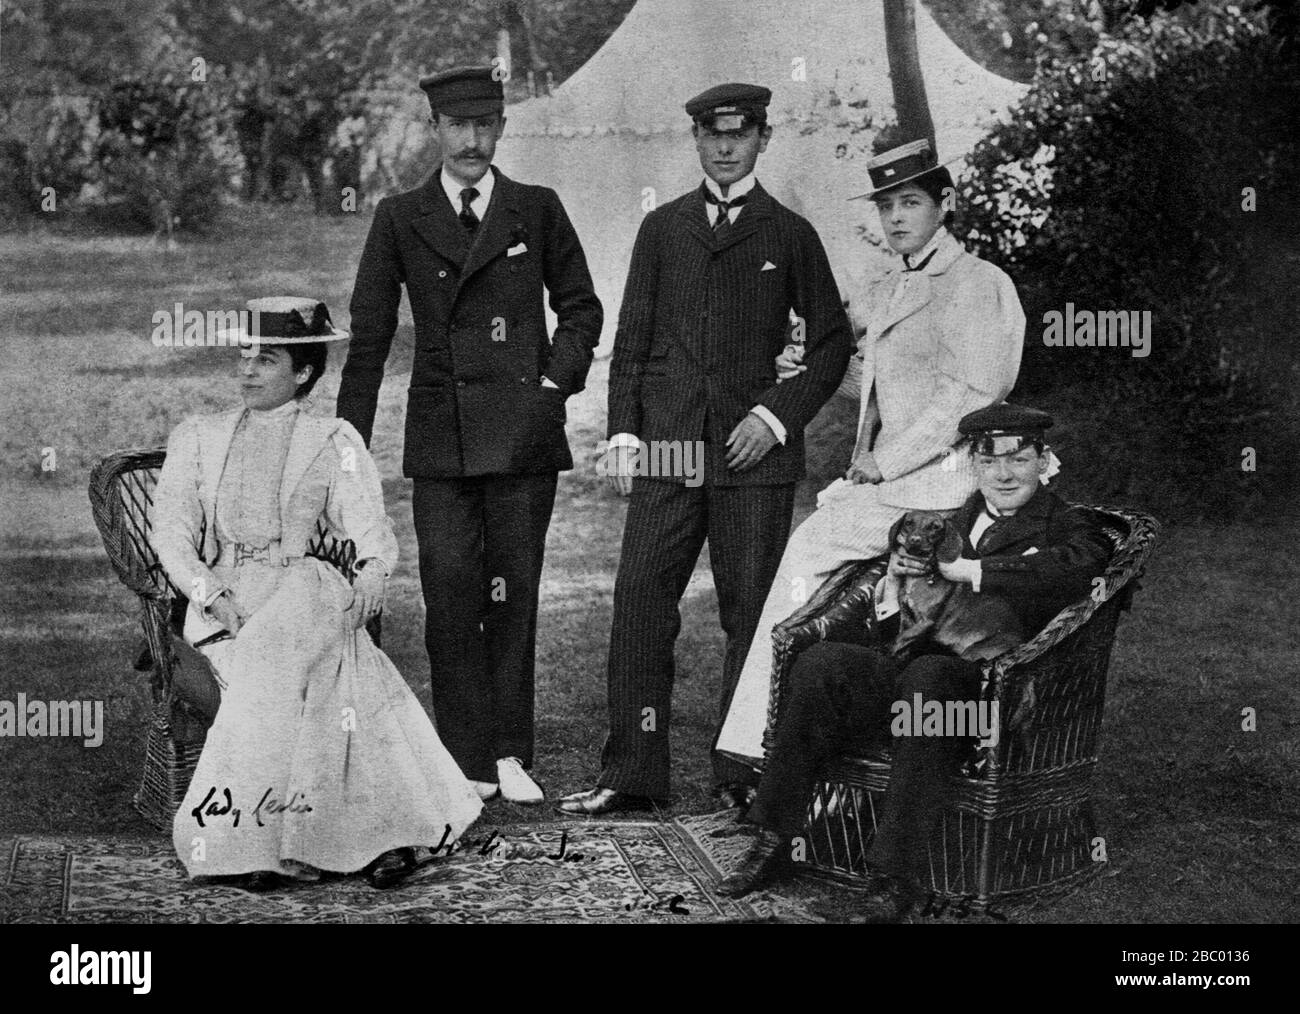 Winston Churchill at Cowes Regatta with his aunt, Lady Leonie Leslie, Mr H.V. Warrender, brother Jack Churchill and his mother, Lady Randolph.1896. Stock Photo